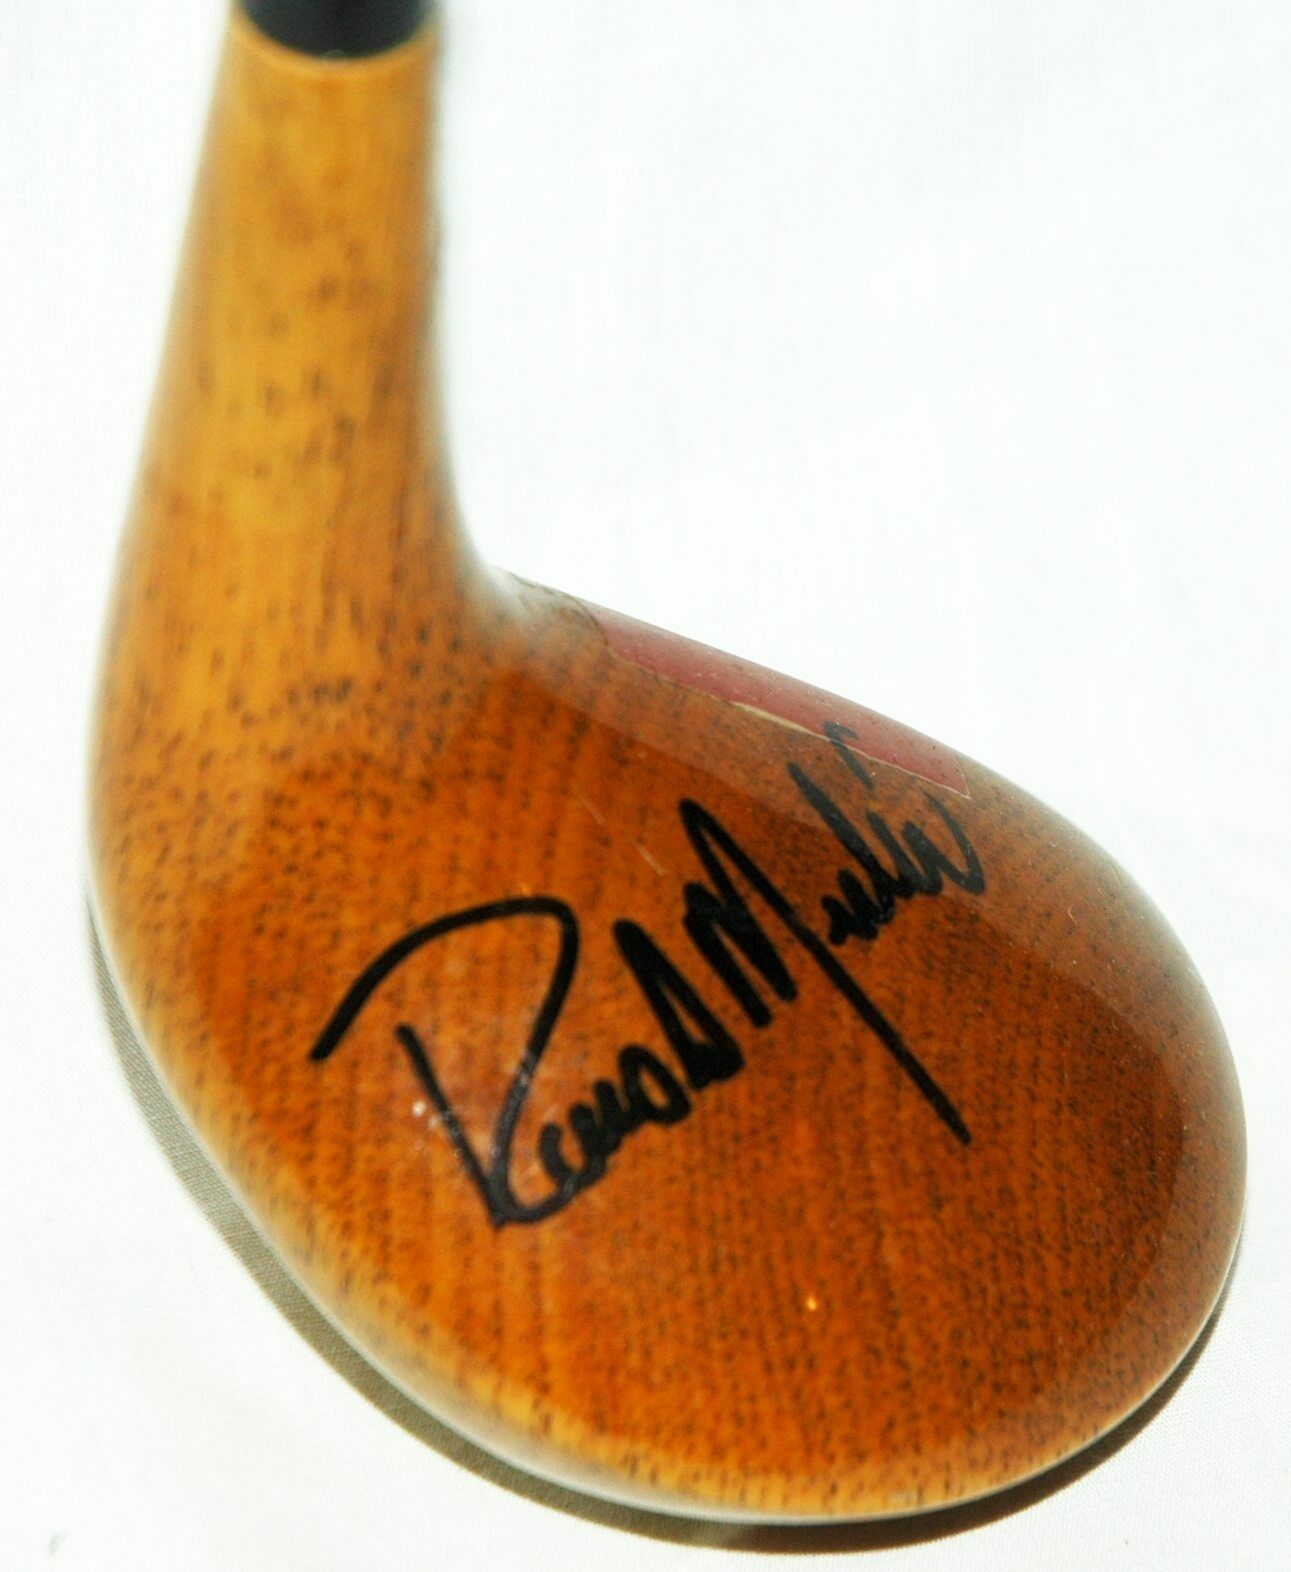 Rocco Mediate Autographed Signed Vintage Wood Golf Club